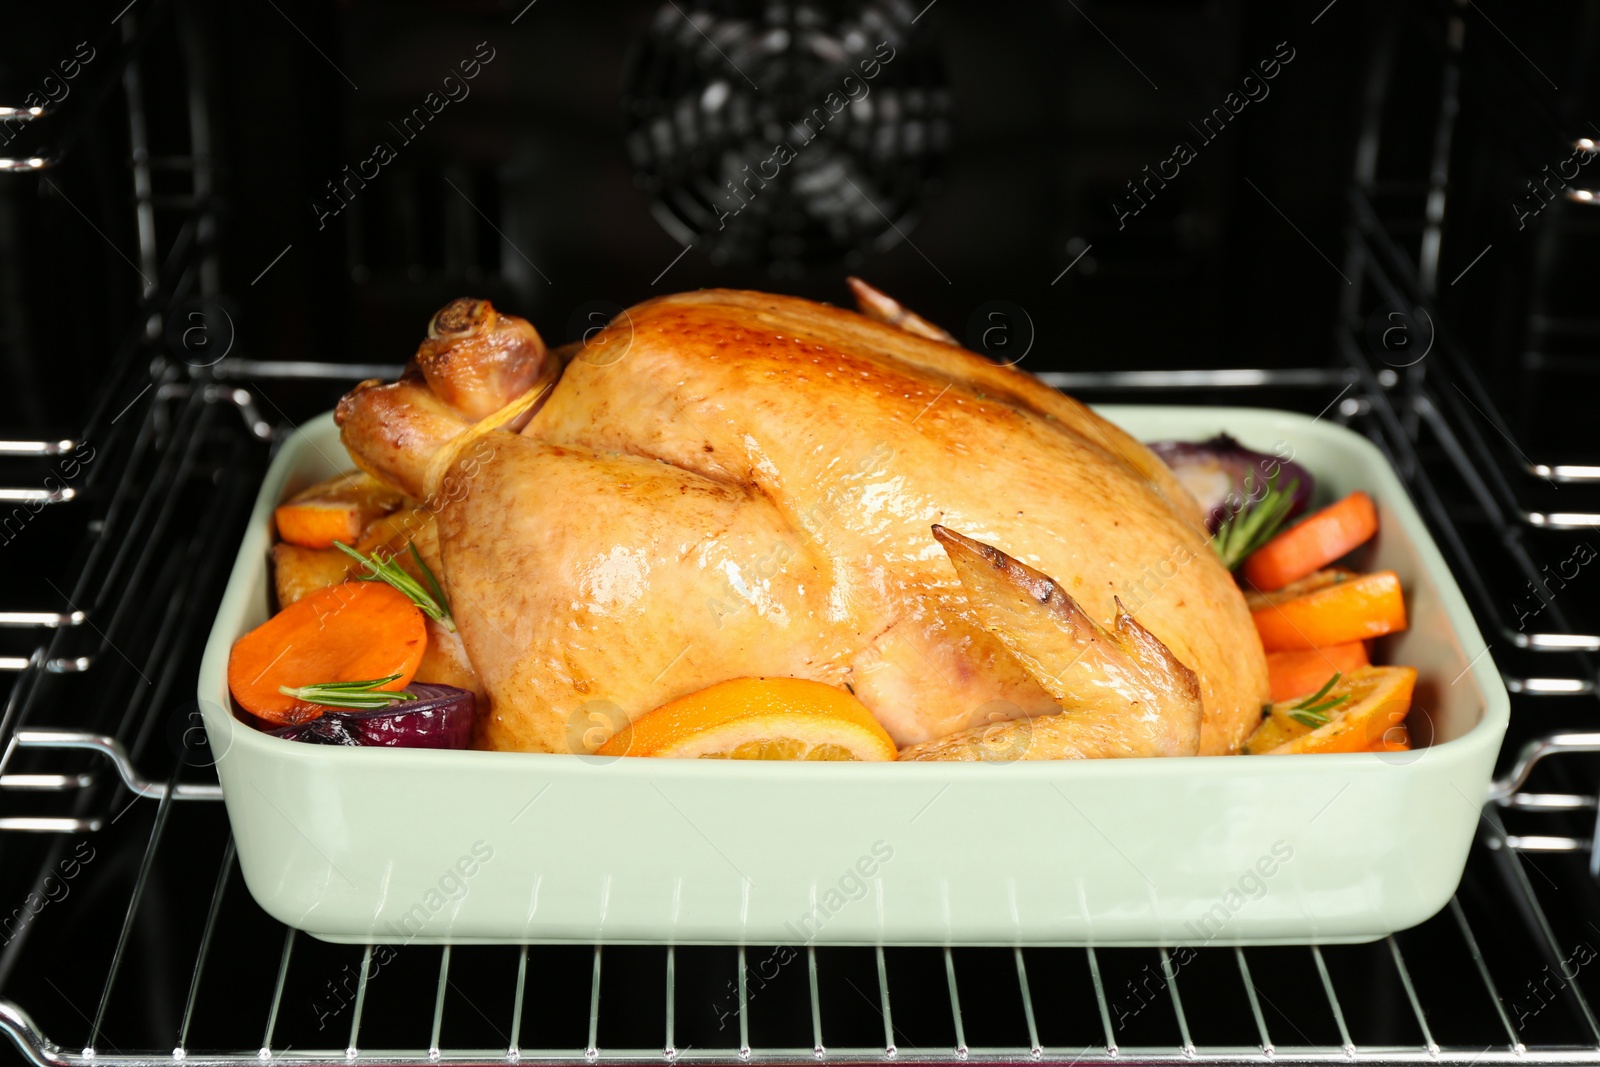 Photo of Baking pan with chicken, oranges and vegetables in oven